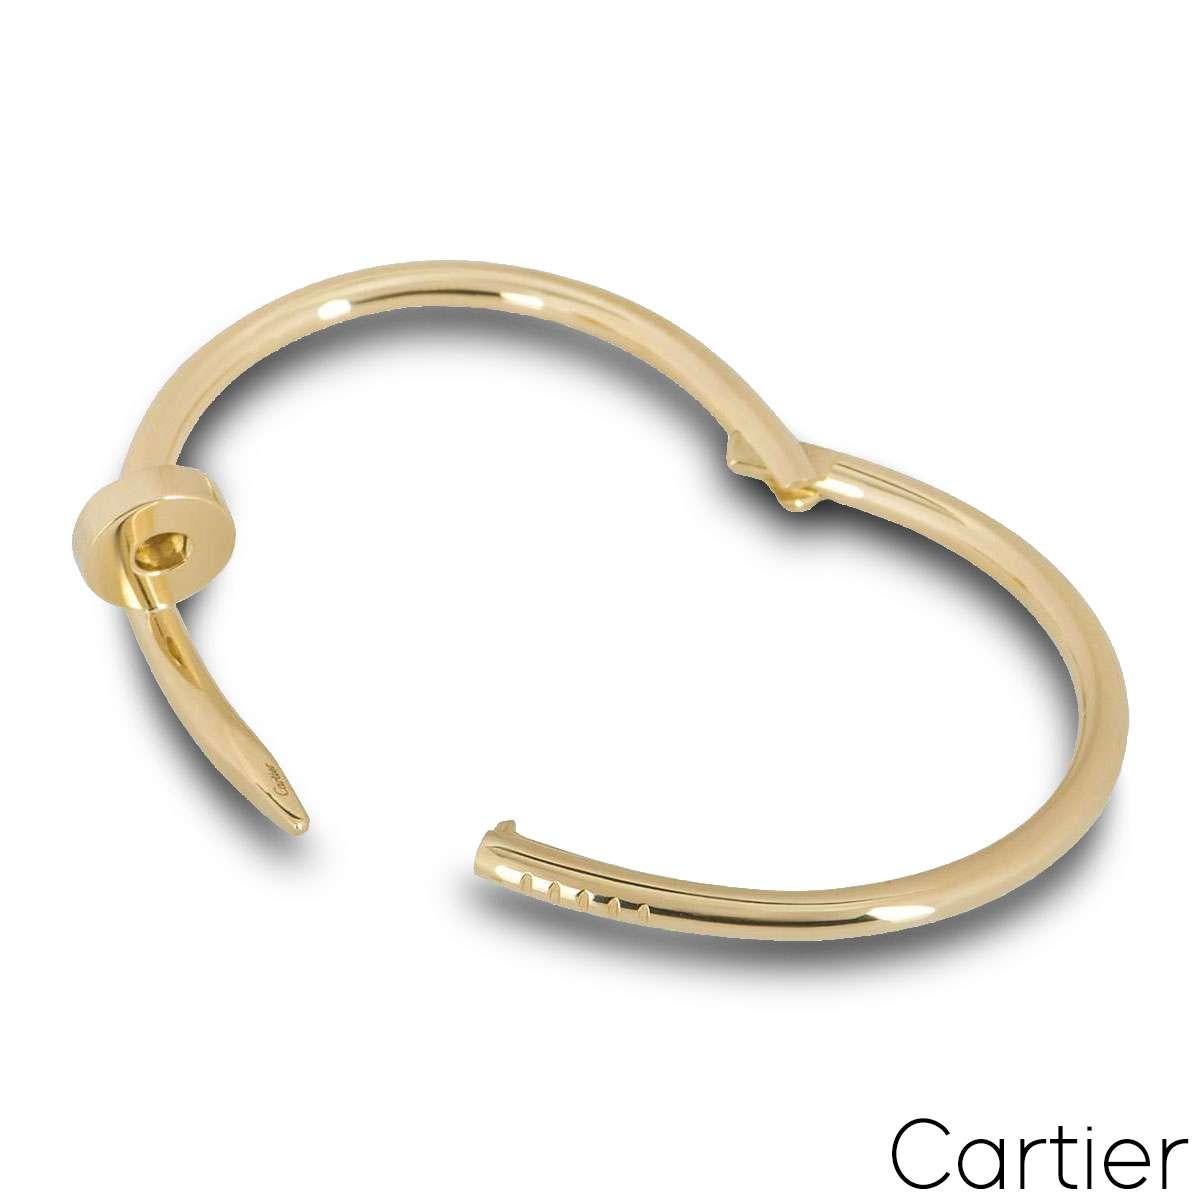 Cartier Yellow Gold Juste Un Clou Bracelet Size 16 B6048216 In Excellent Condition For Sale In London, GB